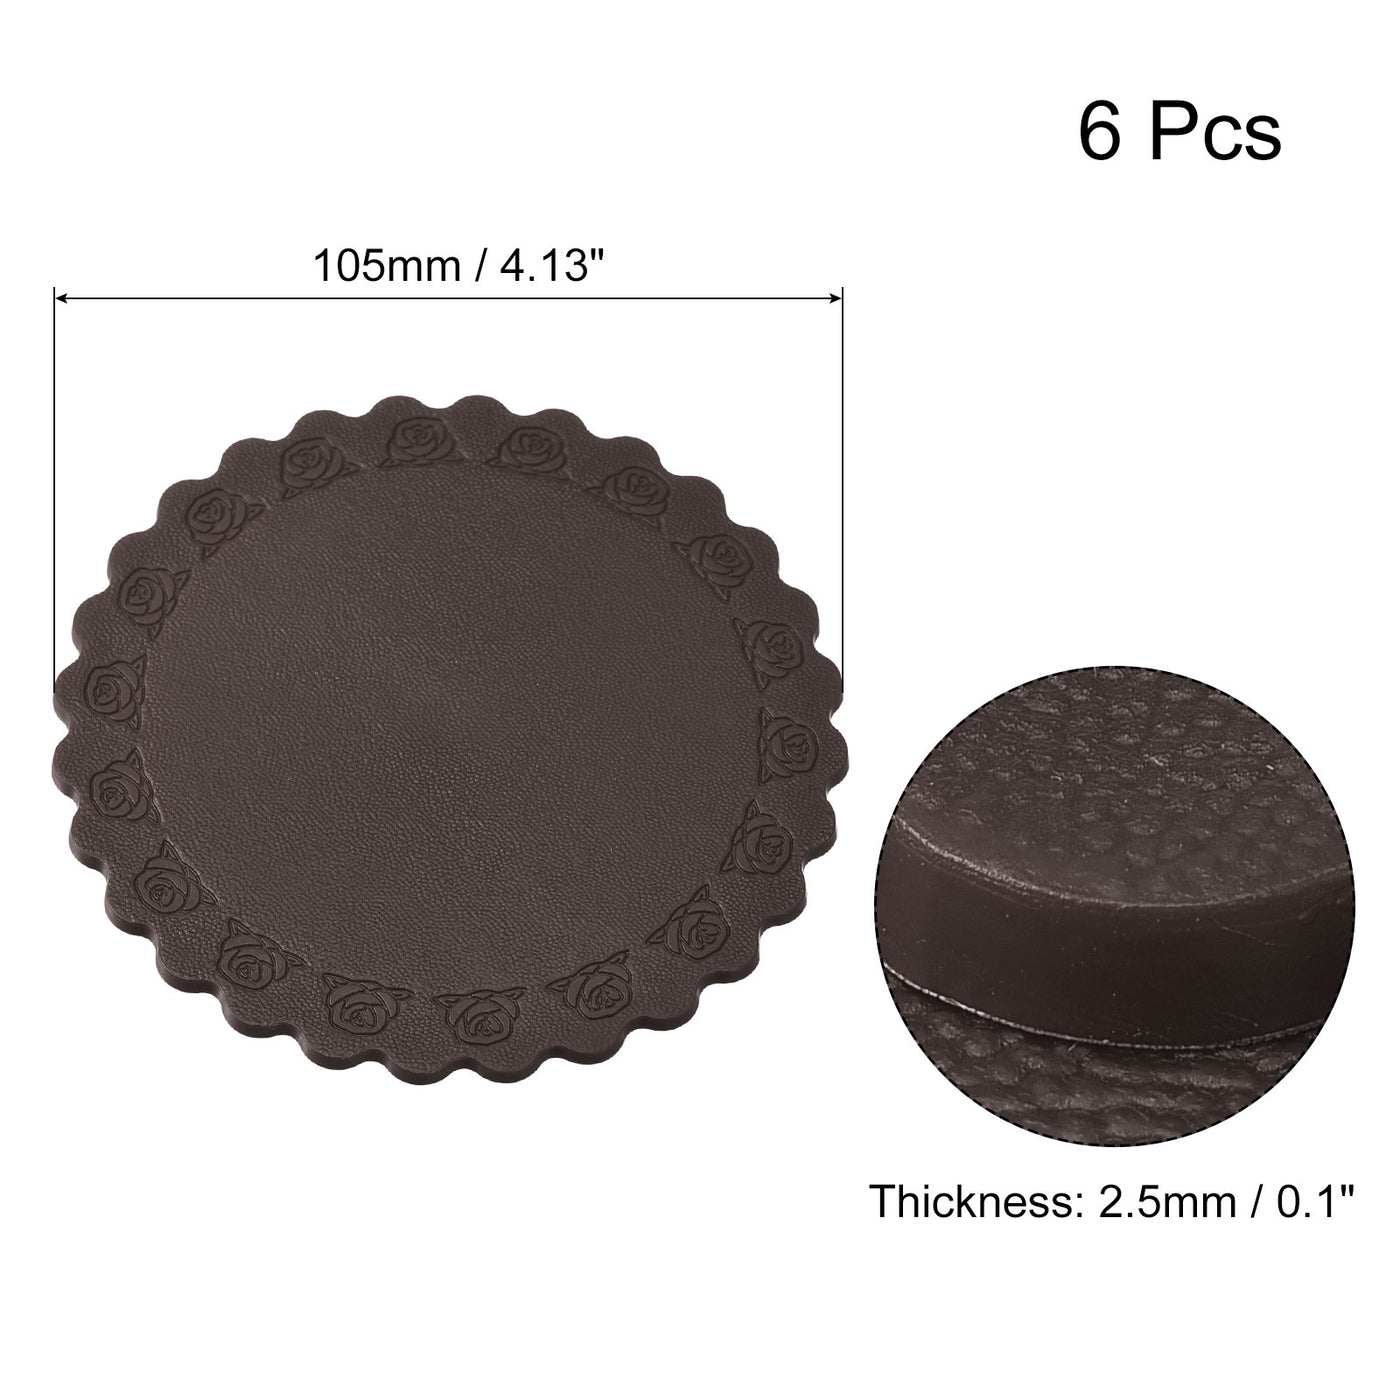 uxcell Uxcell 105mm(4.13") Round Coasters Soft PVC Cup Mat Pad for Tableware Coffee 6pcs